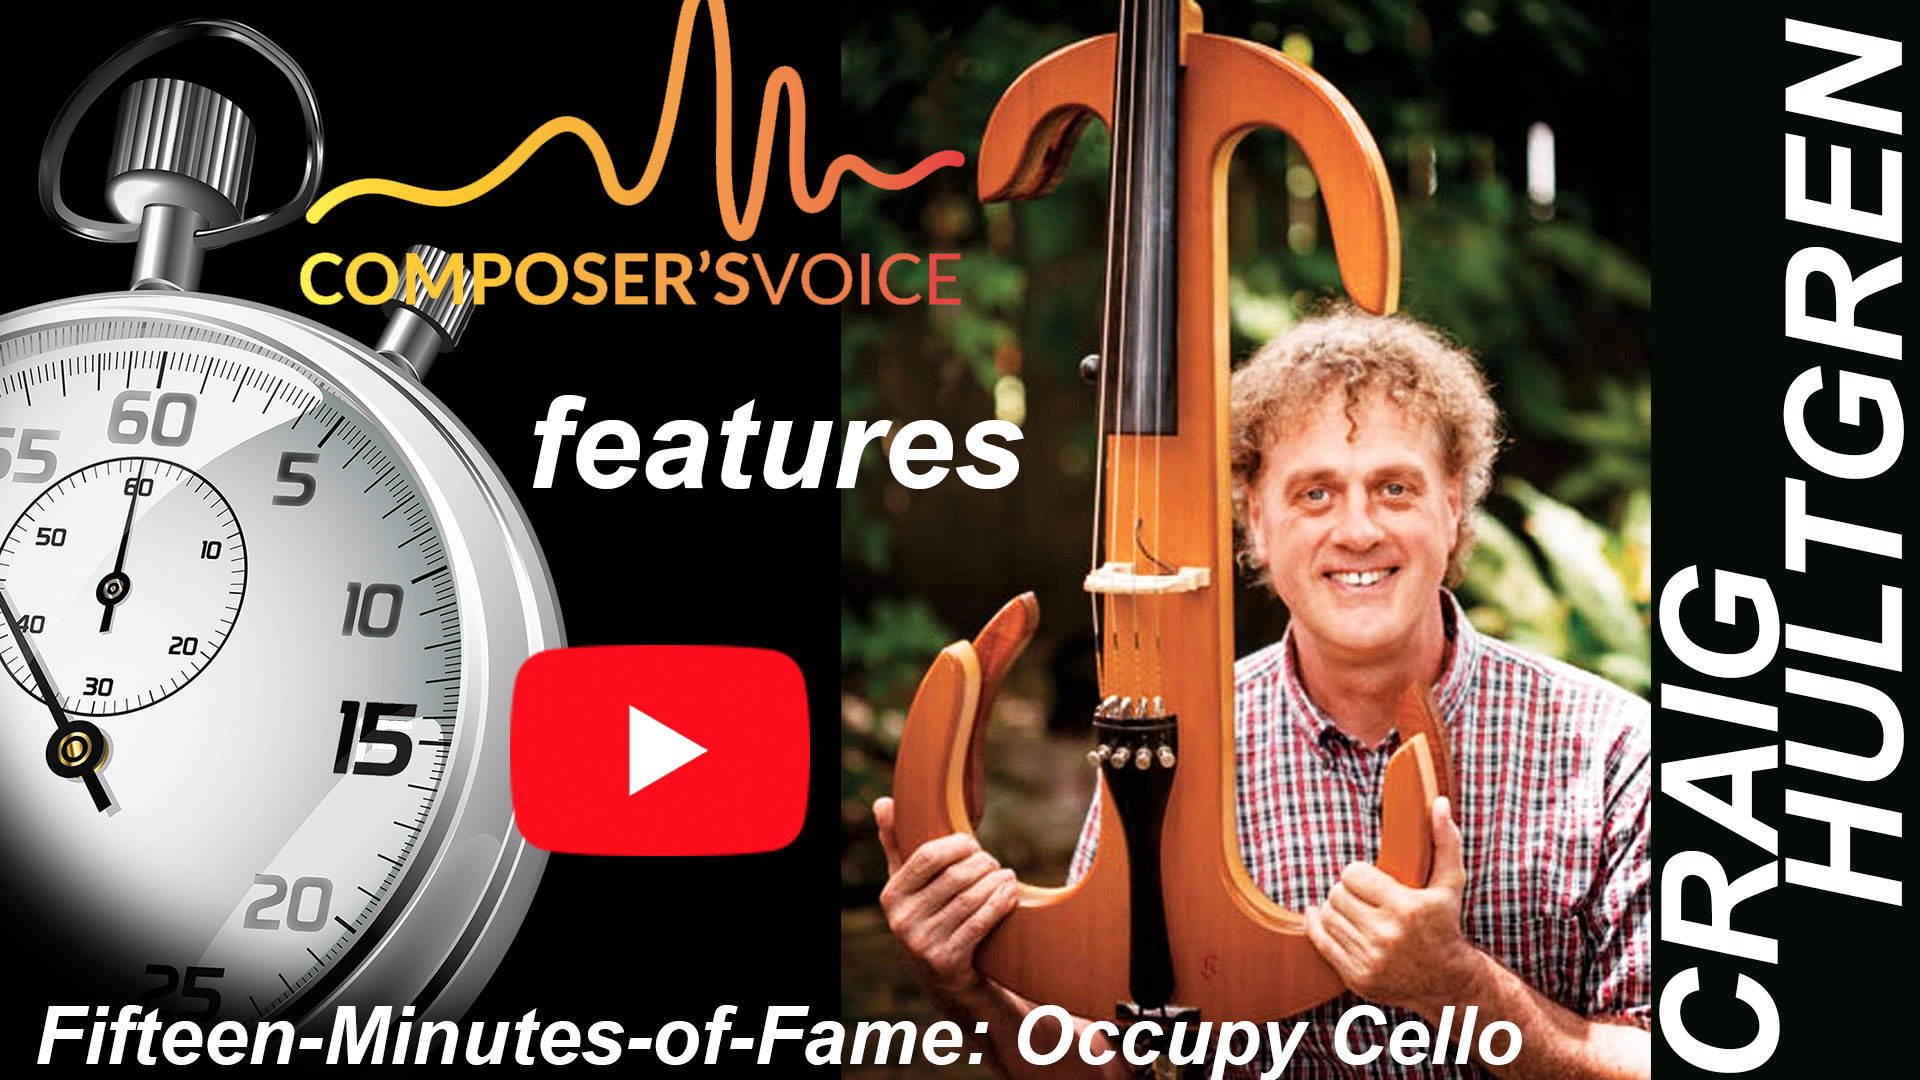 Fifteen-Minutes-of-Fame featuring Craig Hultgren